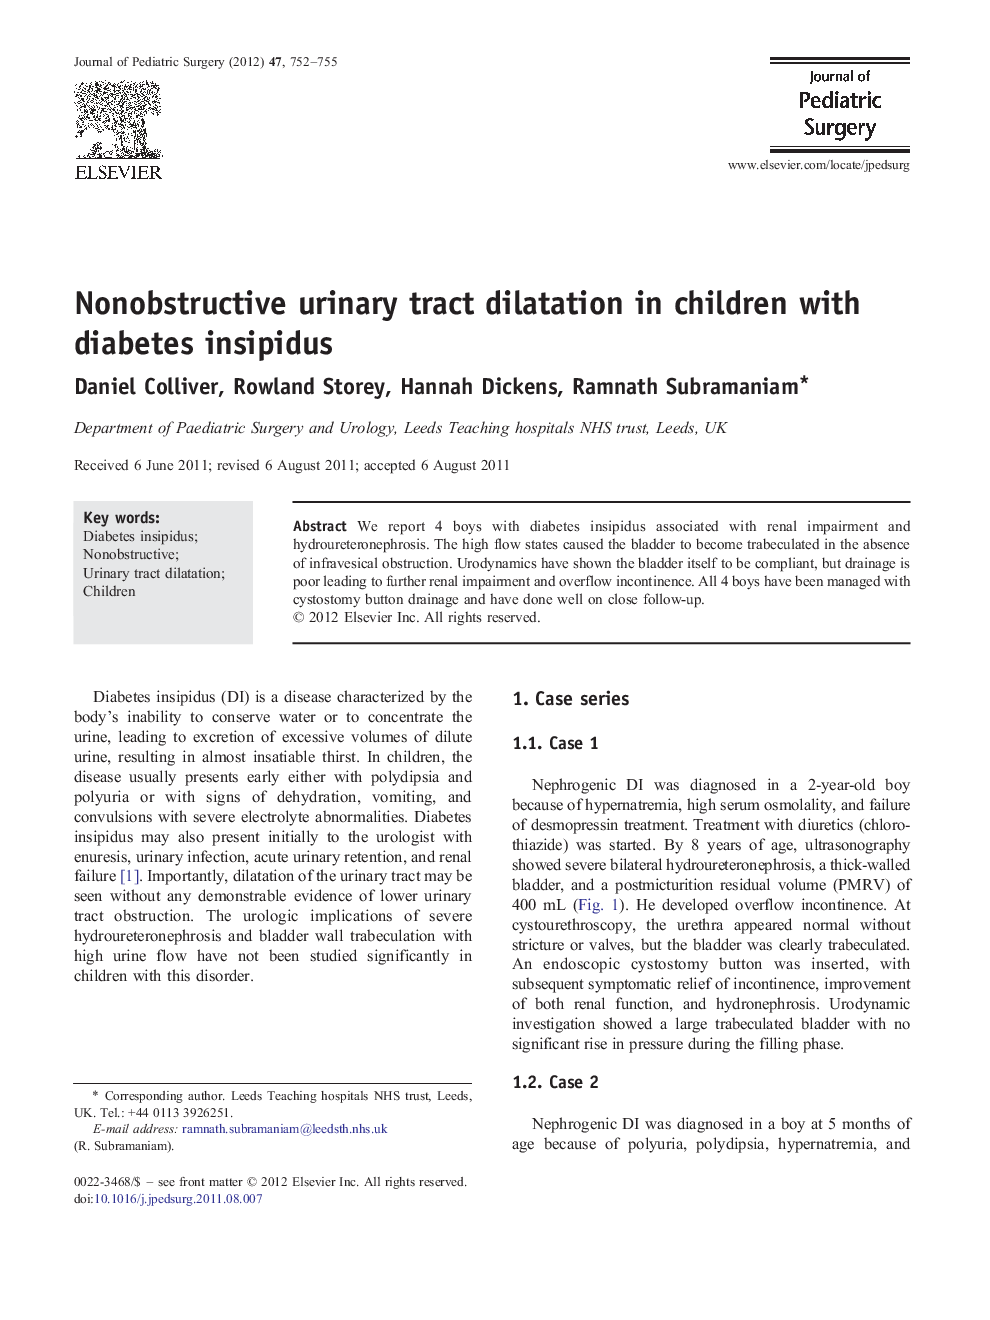 Nonobstructive urinary tract dilatation in children with diabetes insipidus